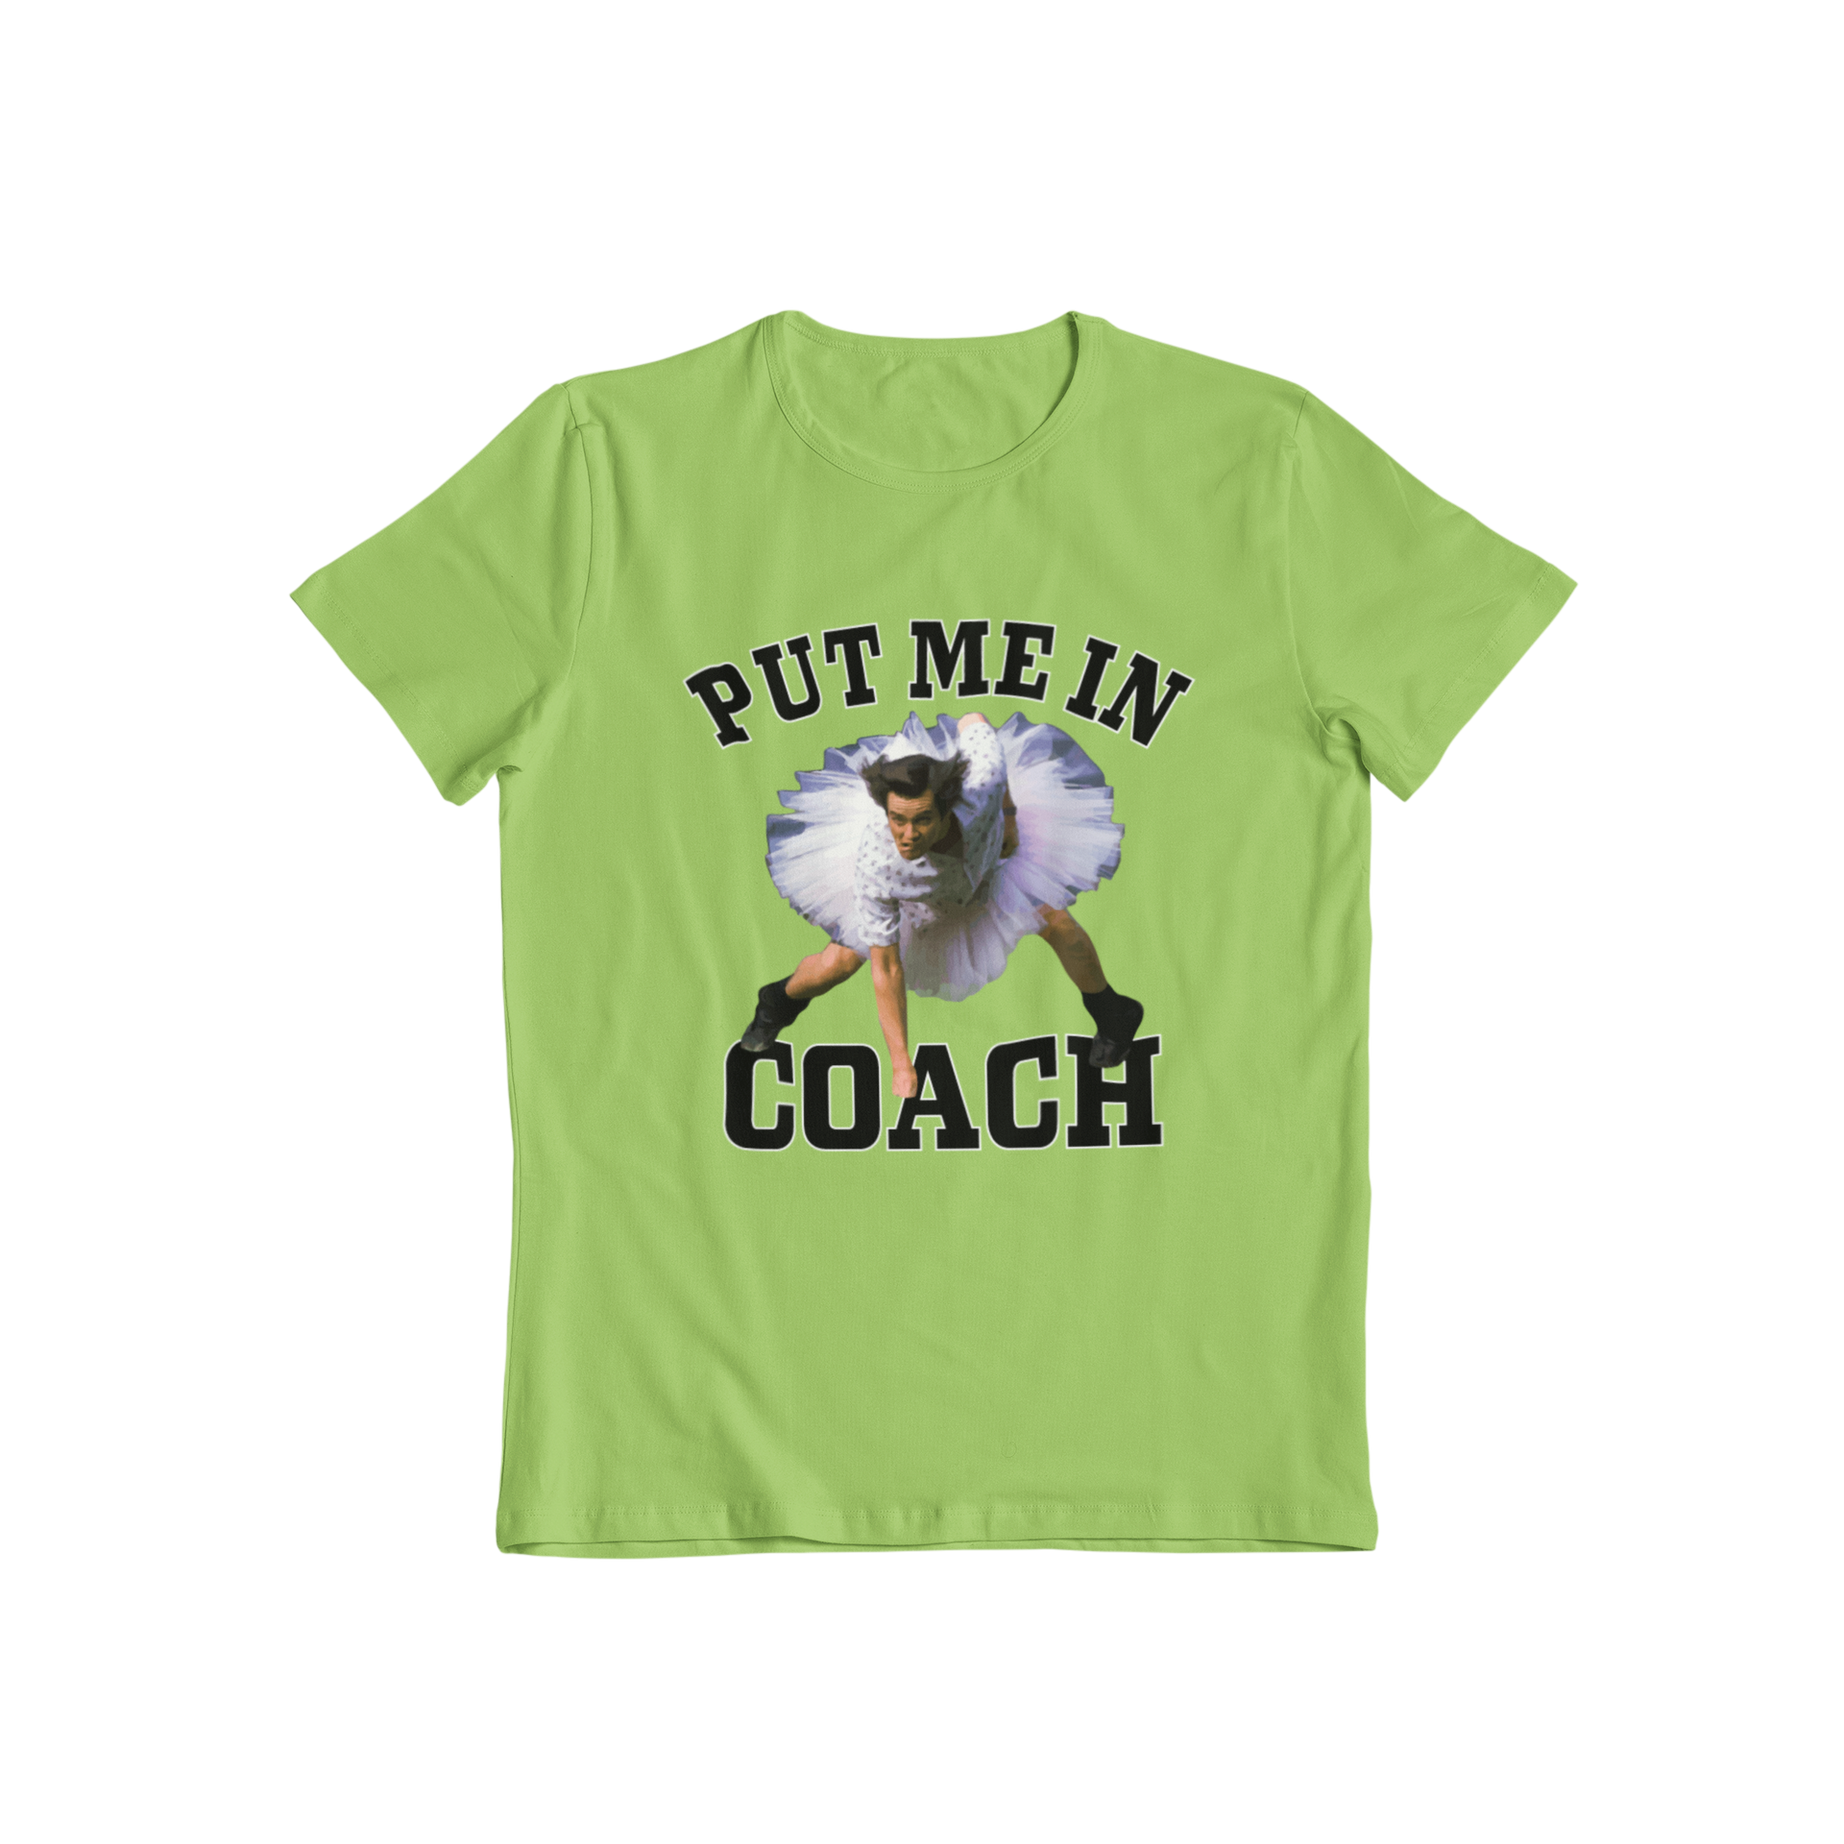 Get ready to show off your love for comedy classics with Teevolution's Ace Ventura Alrighty, Put me in coach Tee! Our movie inspired t-shirts are the perfect way to express your fandom and add a little humor to your wardrobe